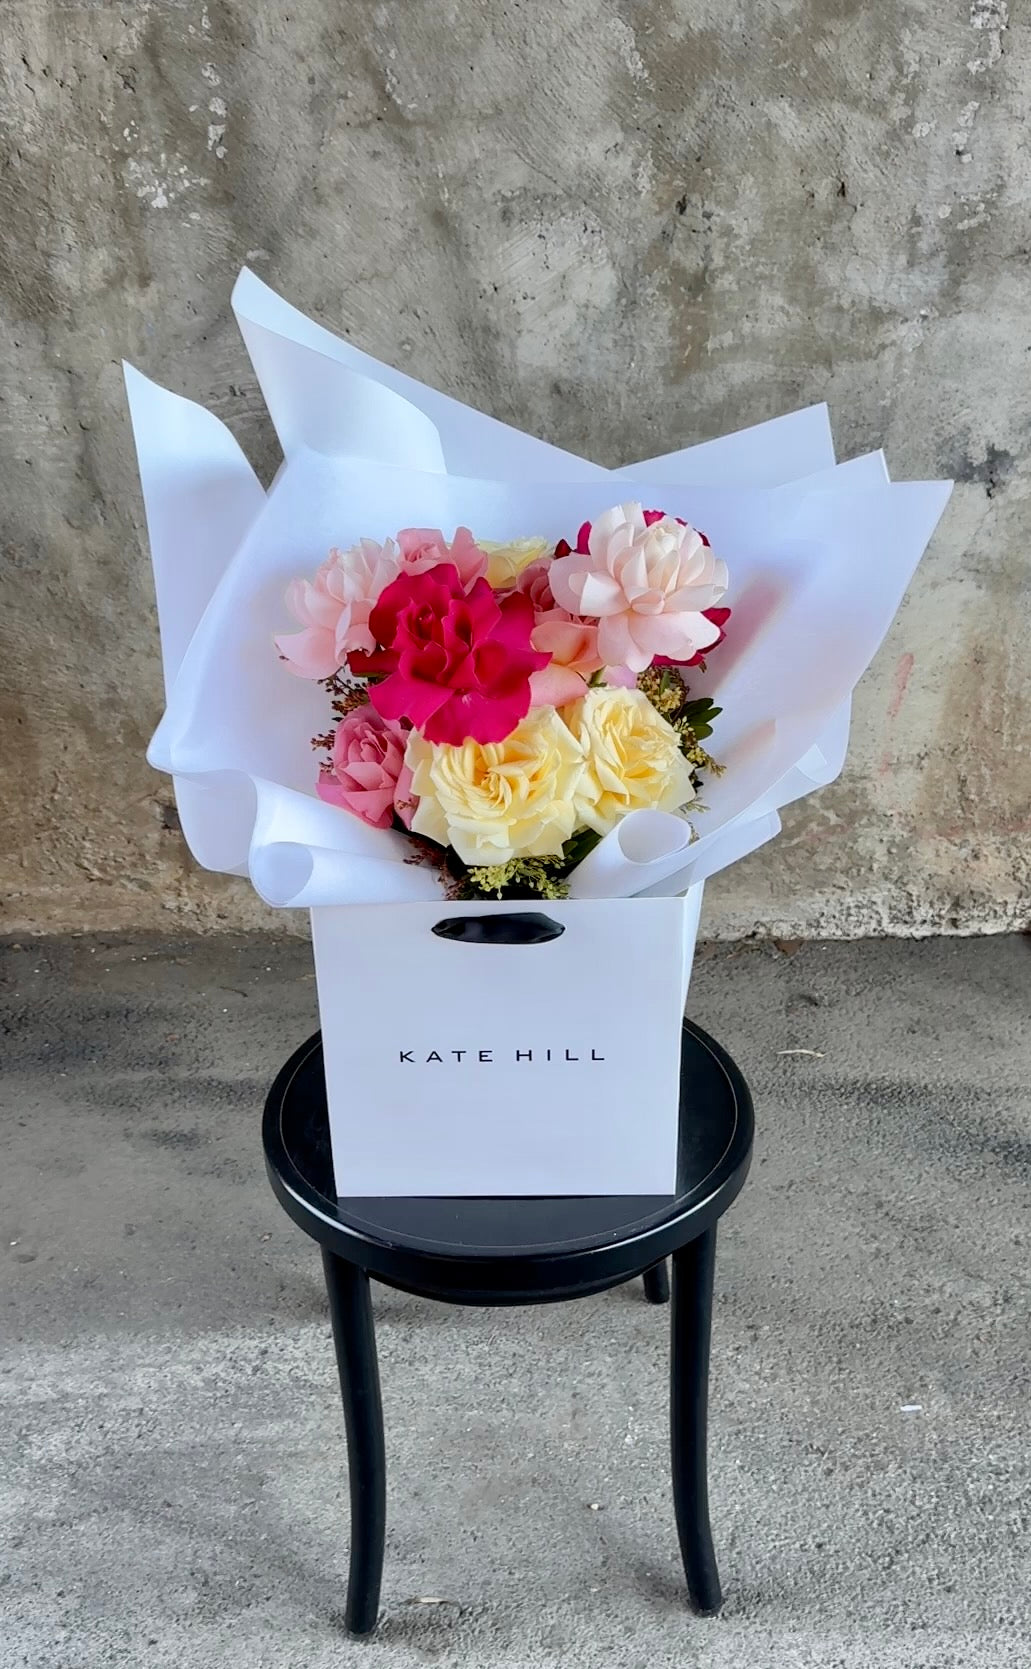 Video of mixed rose bouquet. A bouquet of mixed coloured reflexed roses, beautifully wrapped in white and placed into a KHF flower bag. Bouquet sitting on a black bentwood chair against a concrete wall.